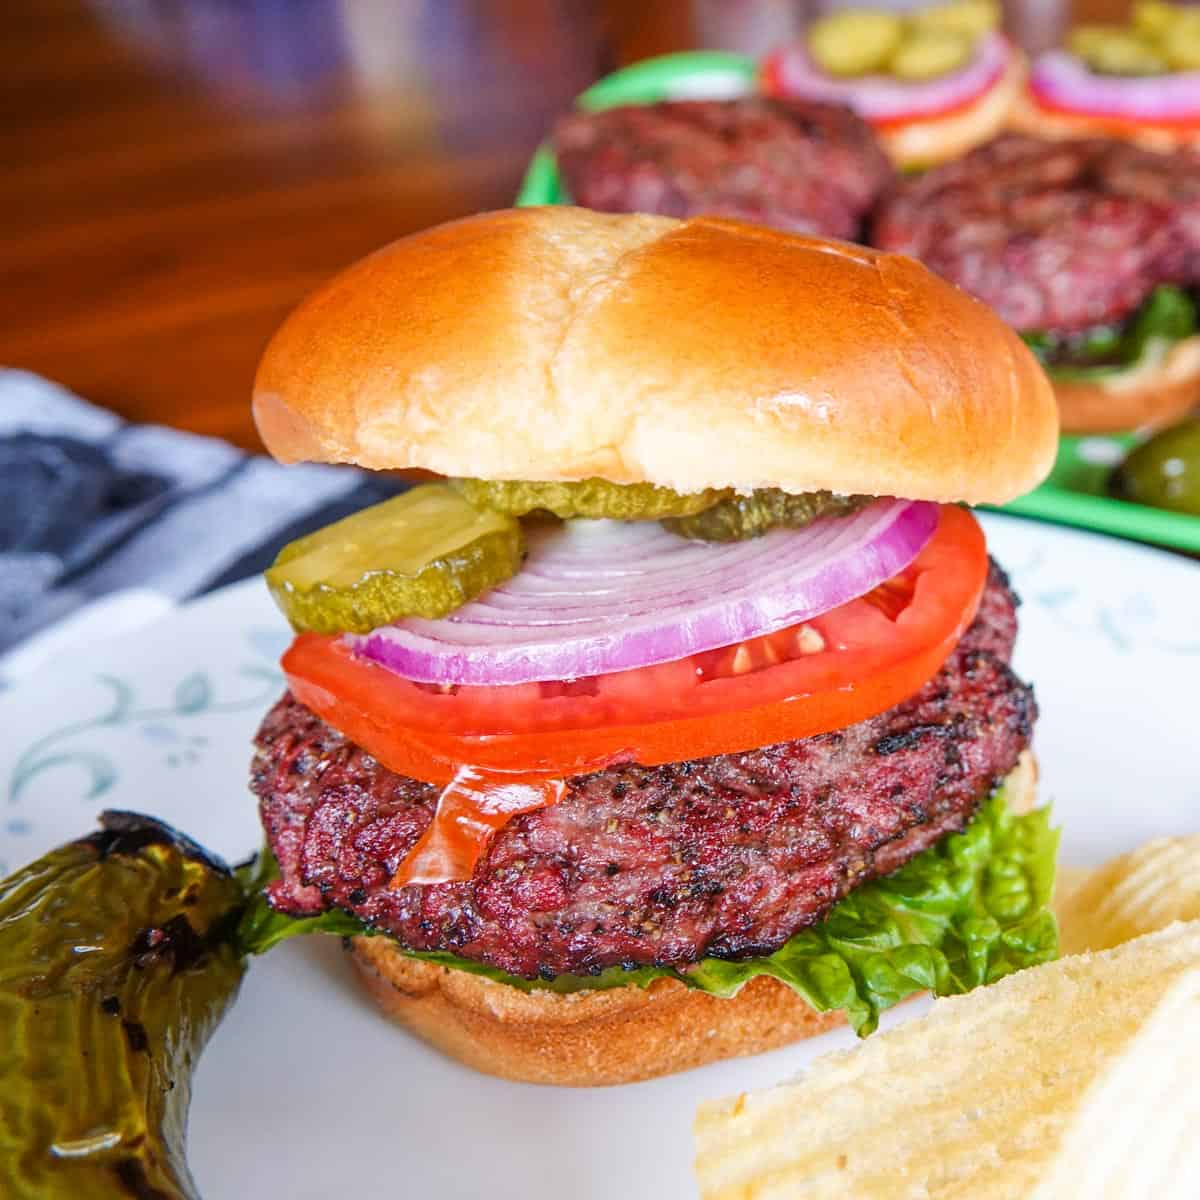 Hamburger with tomato, pickles, onions on plate with burgers in background